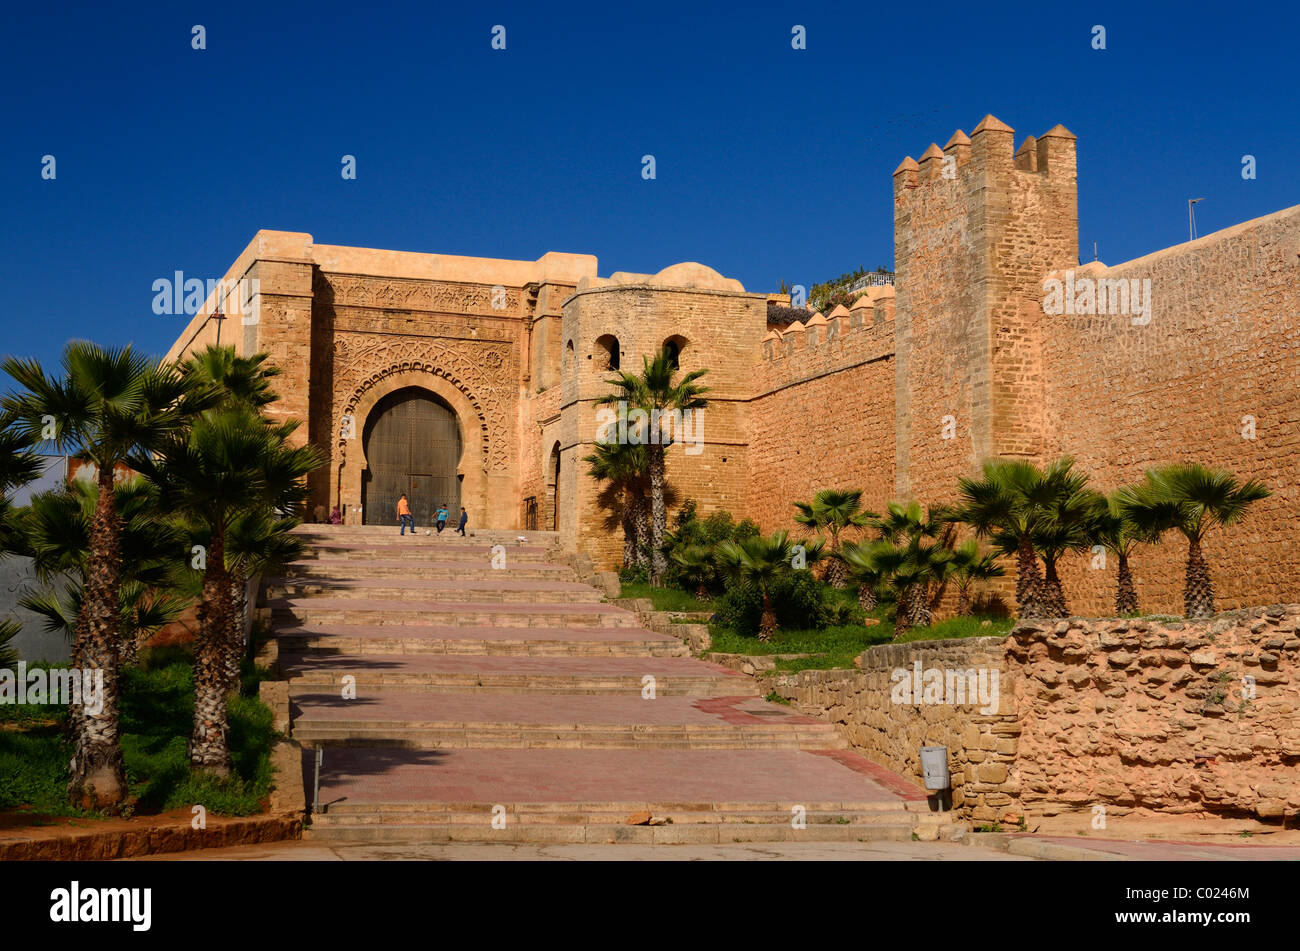 Boys playing soccer at Bab Oudaia gate to the Kasbah El Alou cemetery in Rabat Morocco North Africa Stock Photo